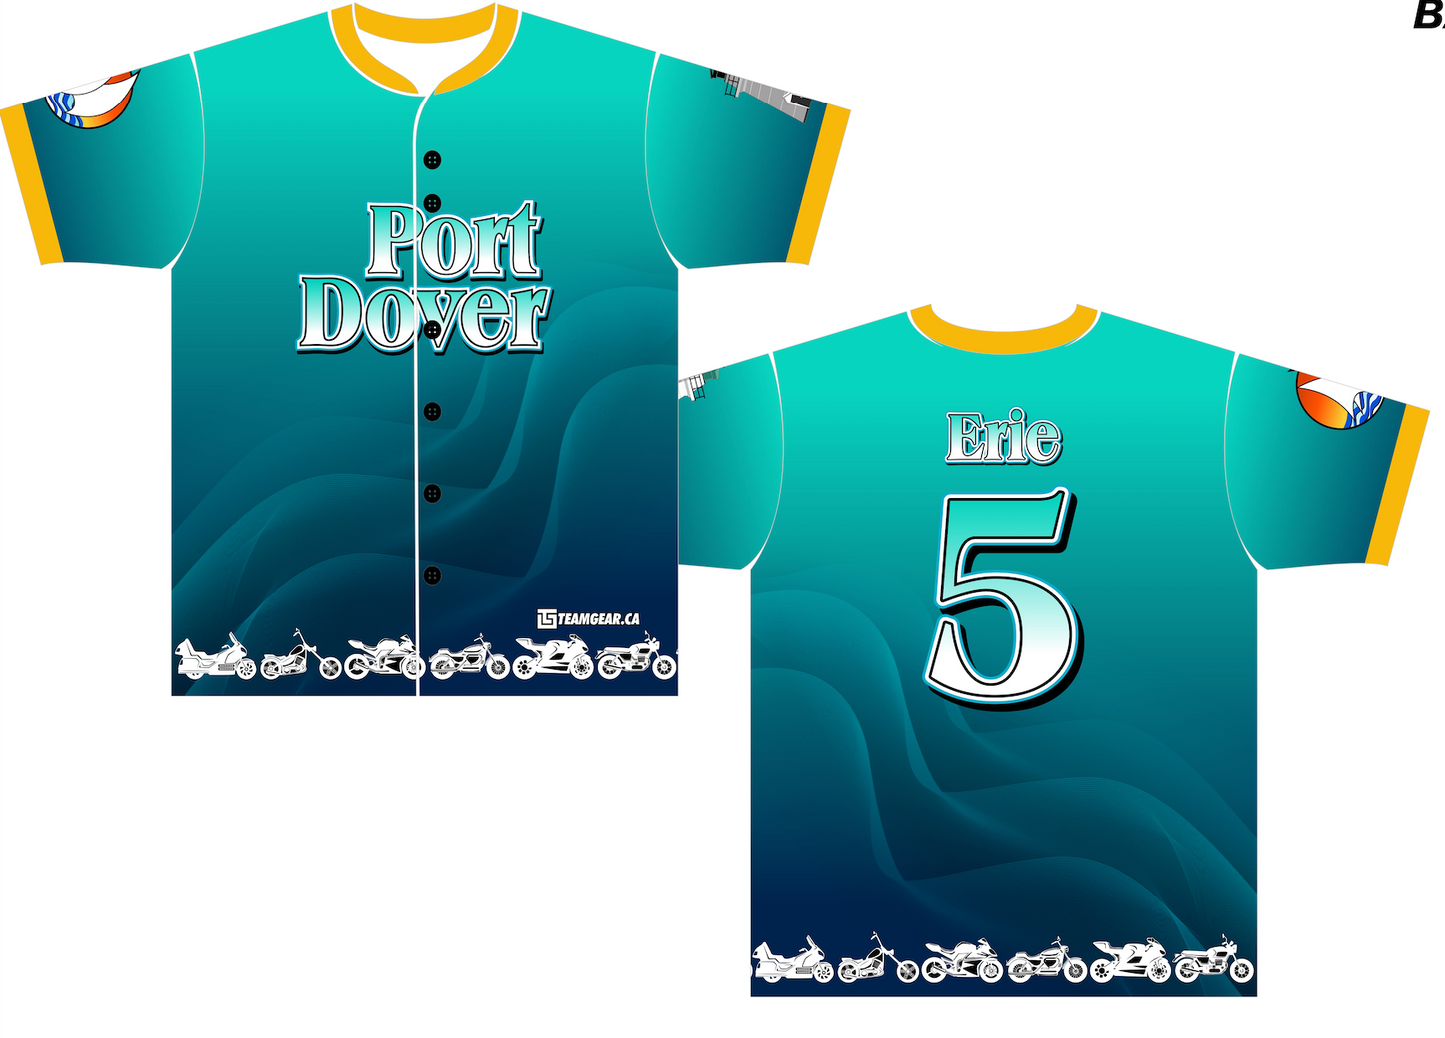 city of Port Dover themed jersey. Custom designed, limited edition City Link jerseys available at teamgear.ca